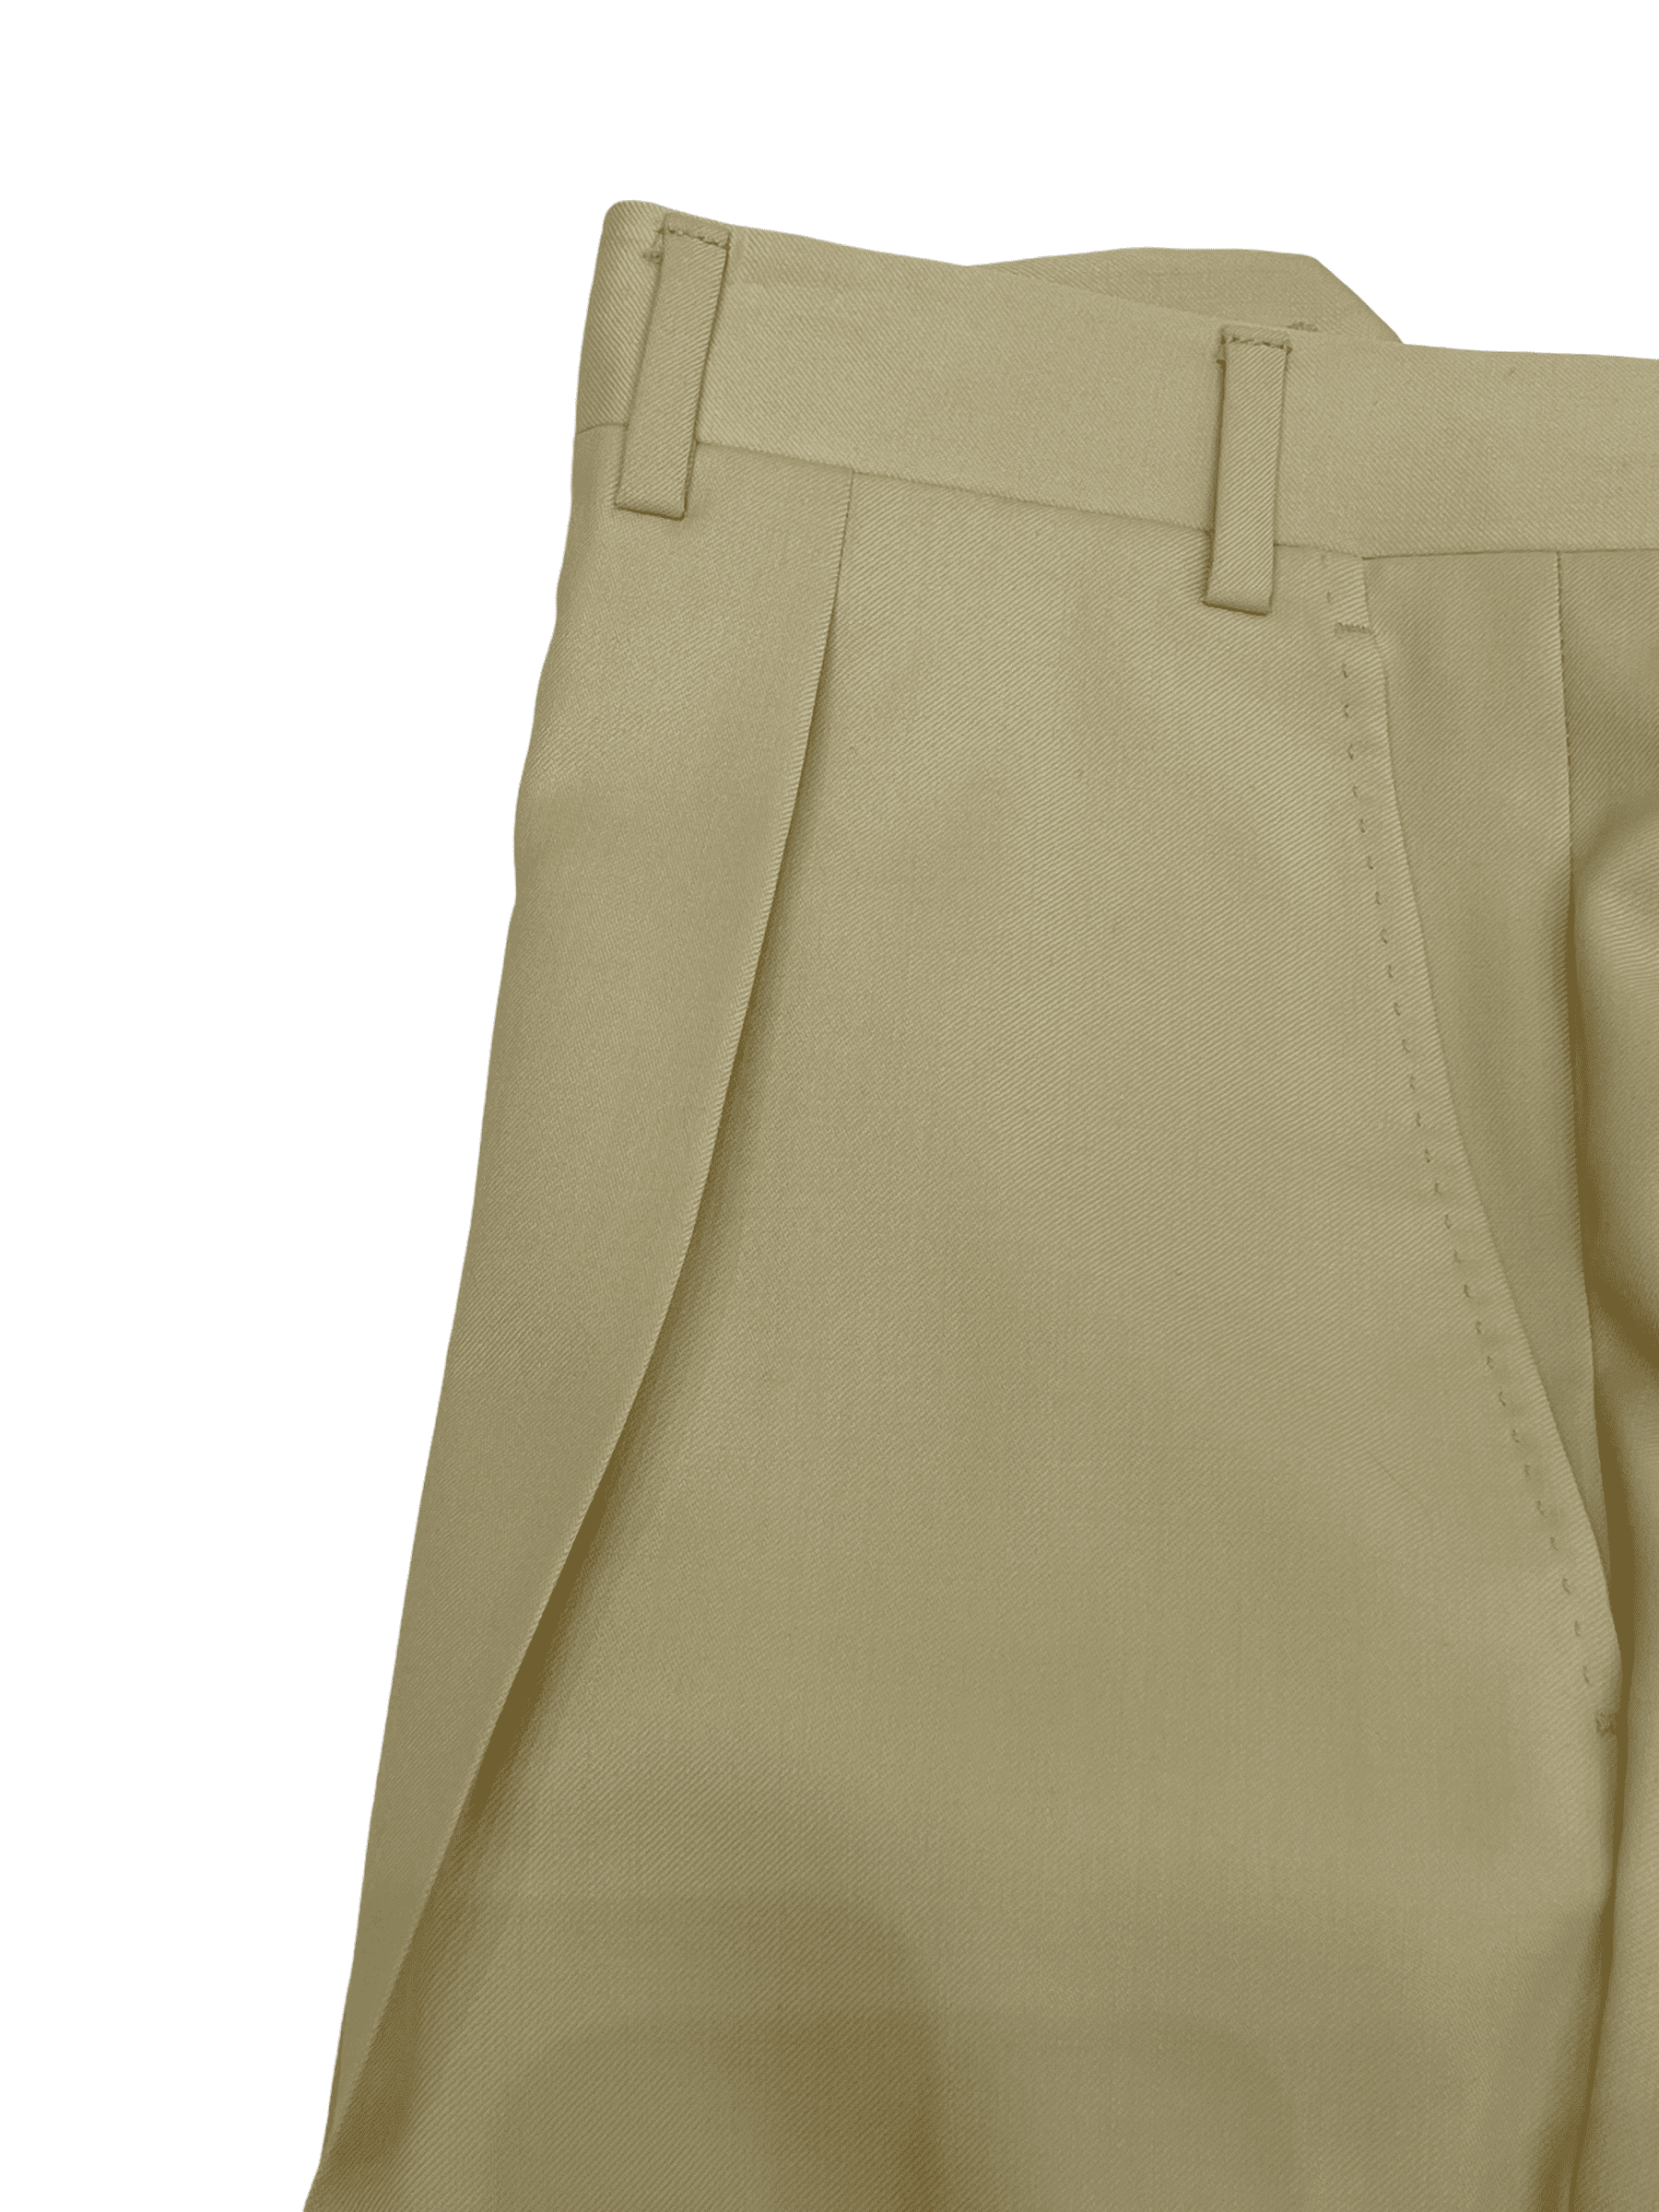 Canali Butter Cream Wool Dress Pant 32W 37.5L - Genuine Design Luxury Consignment Calgary, Alberta, Canada New and Pre-Owned Clothing, Shoes, Accessories.